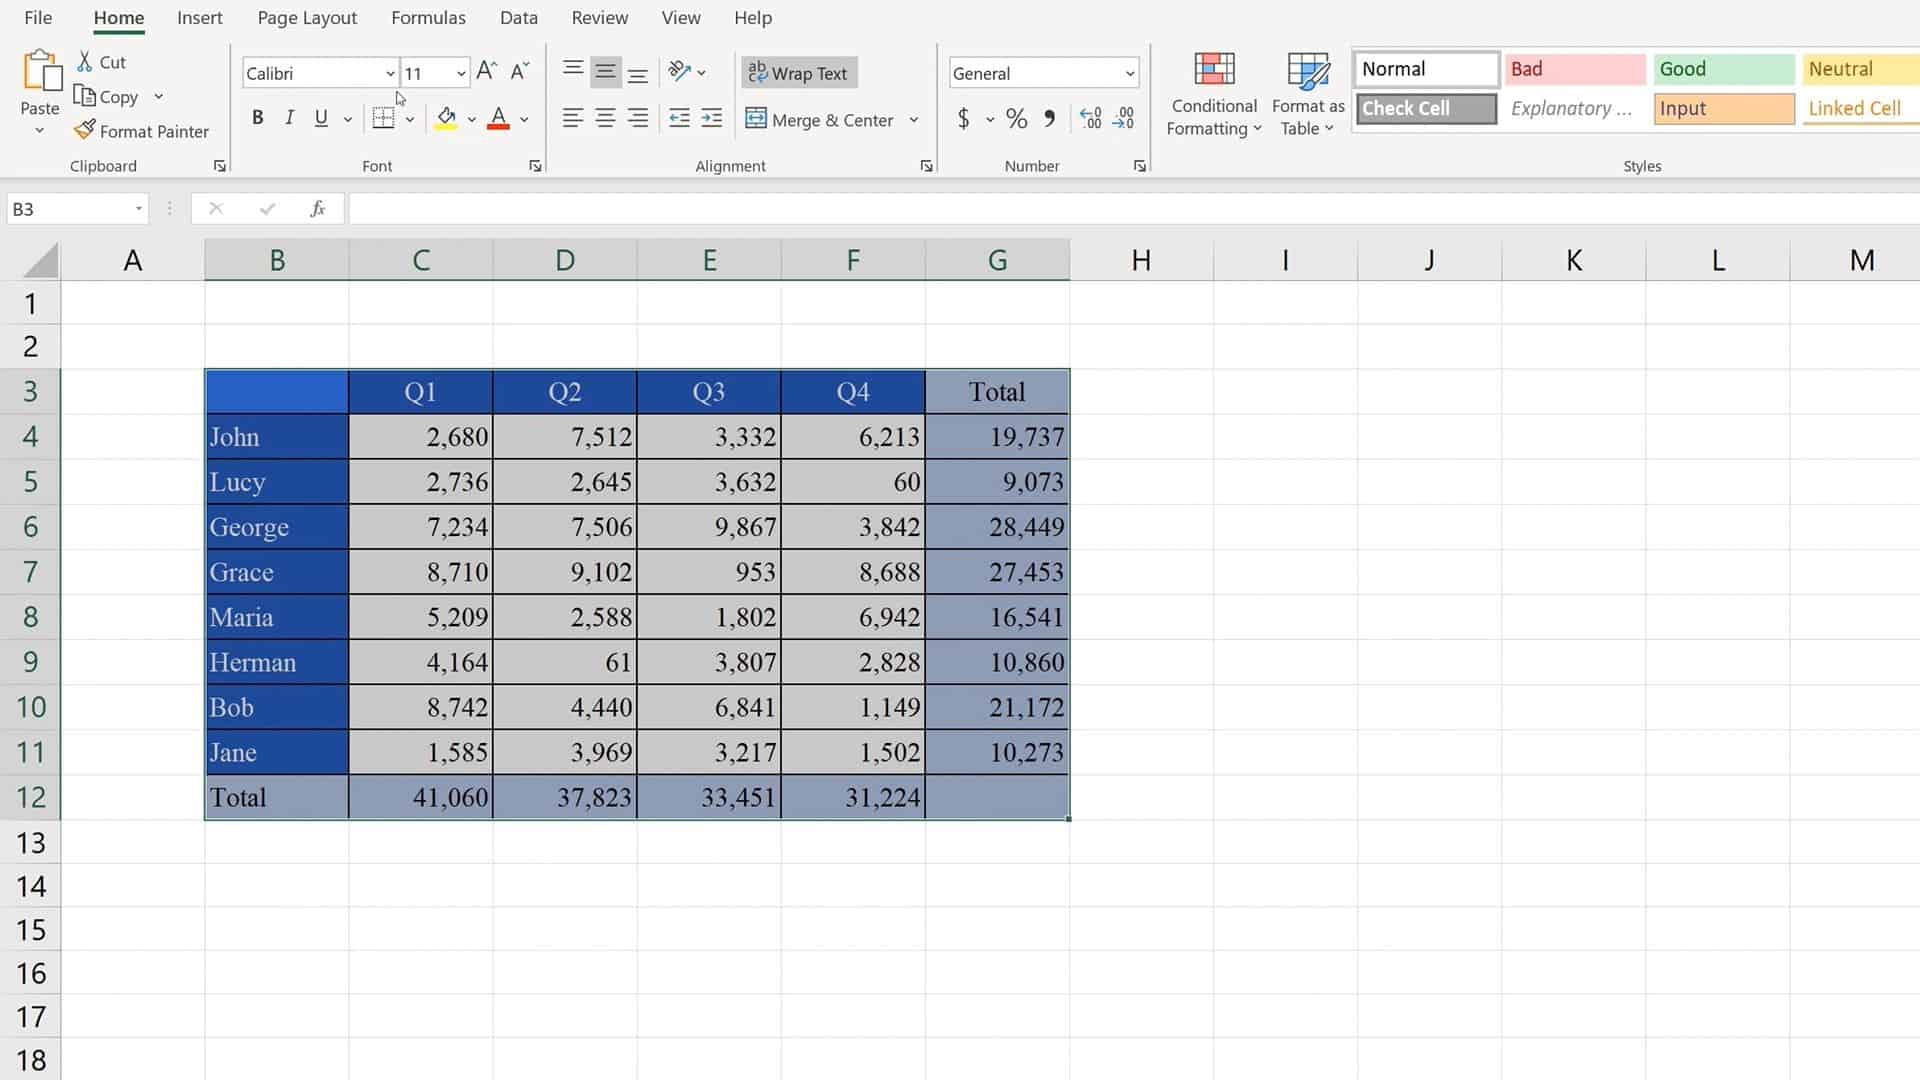 convert pdf table to excel spreadsheet